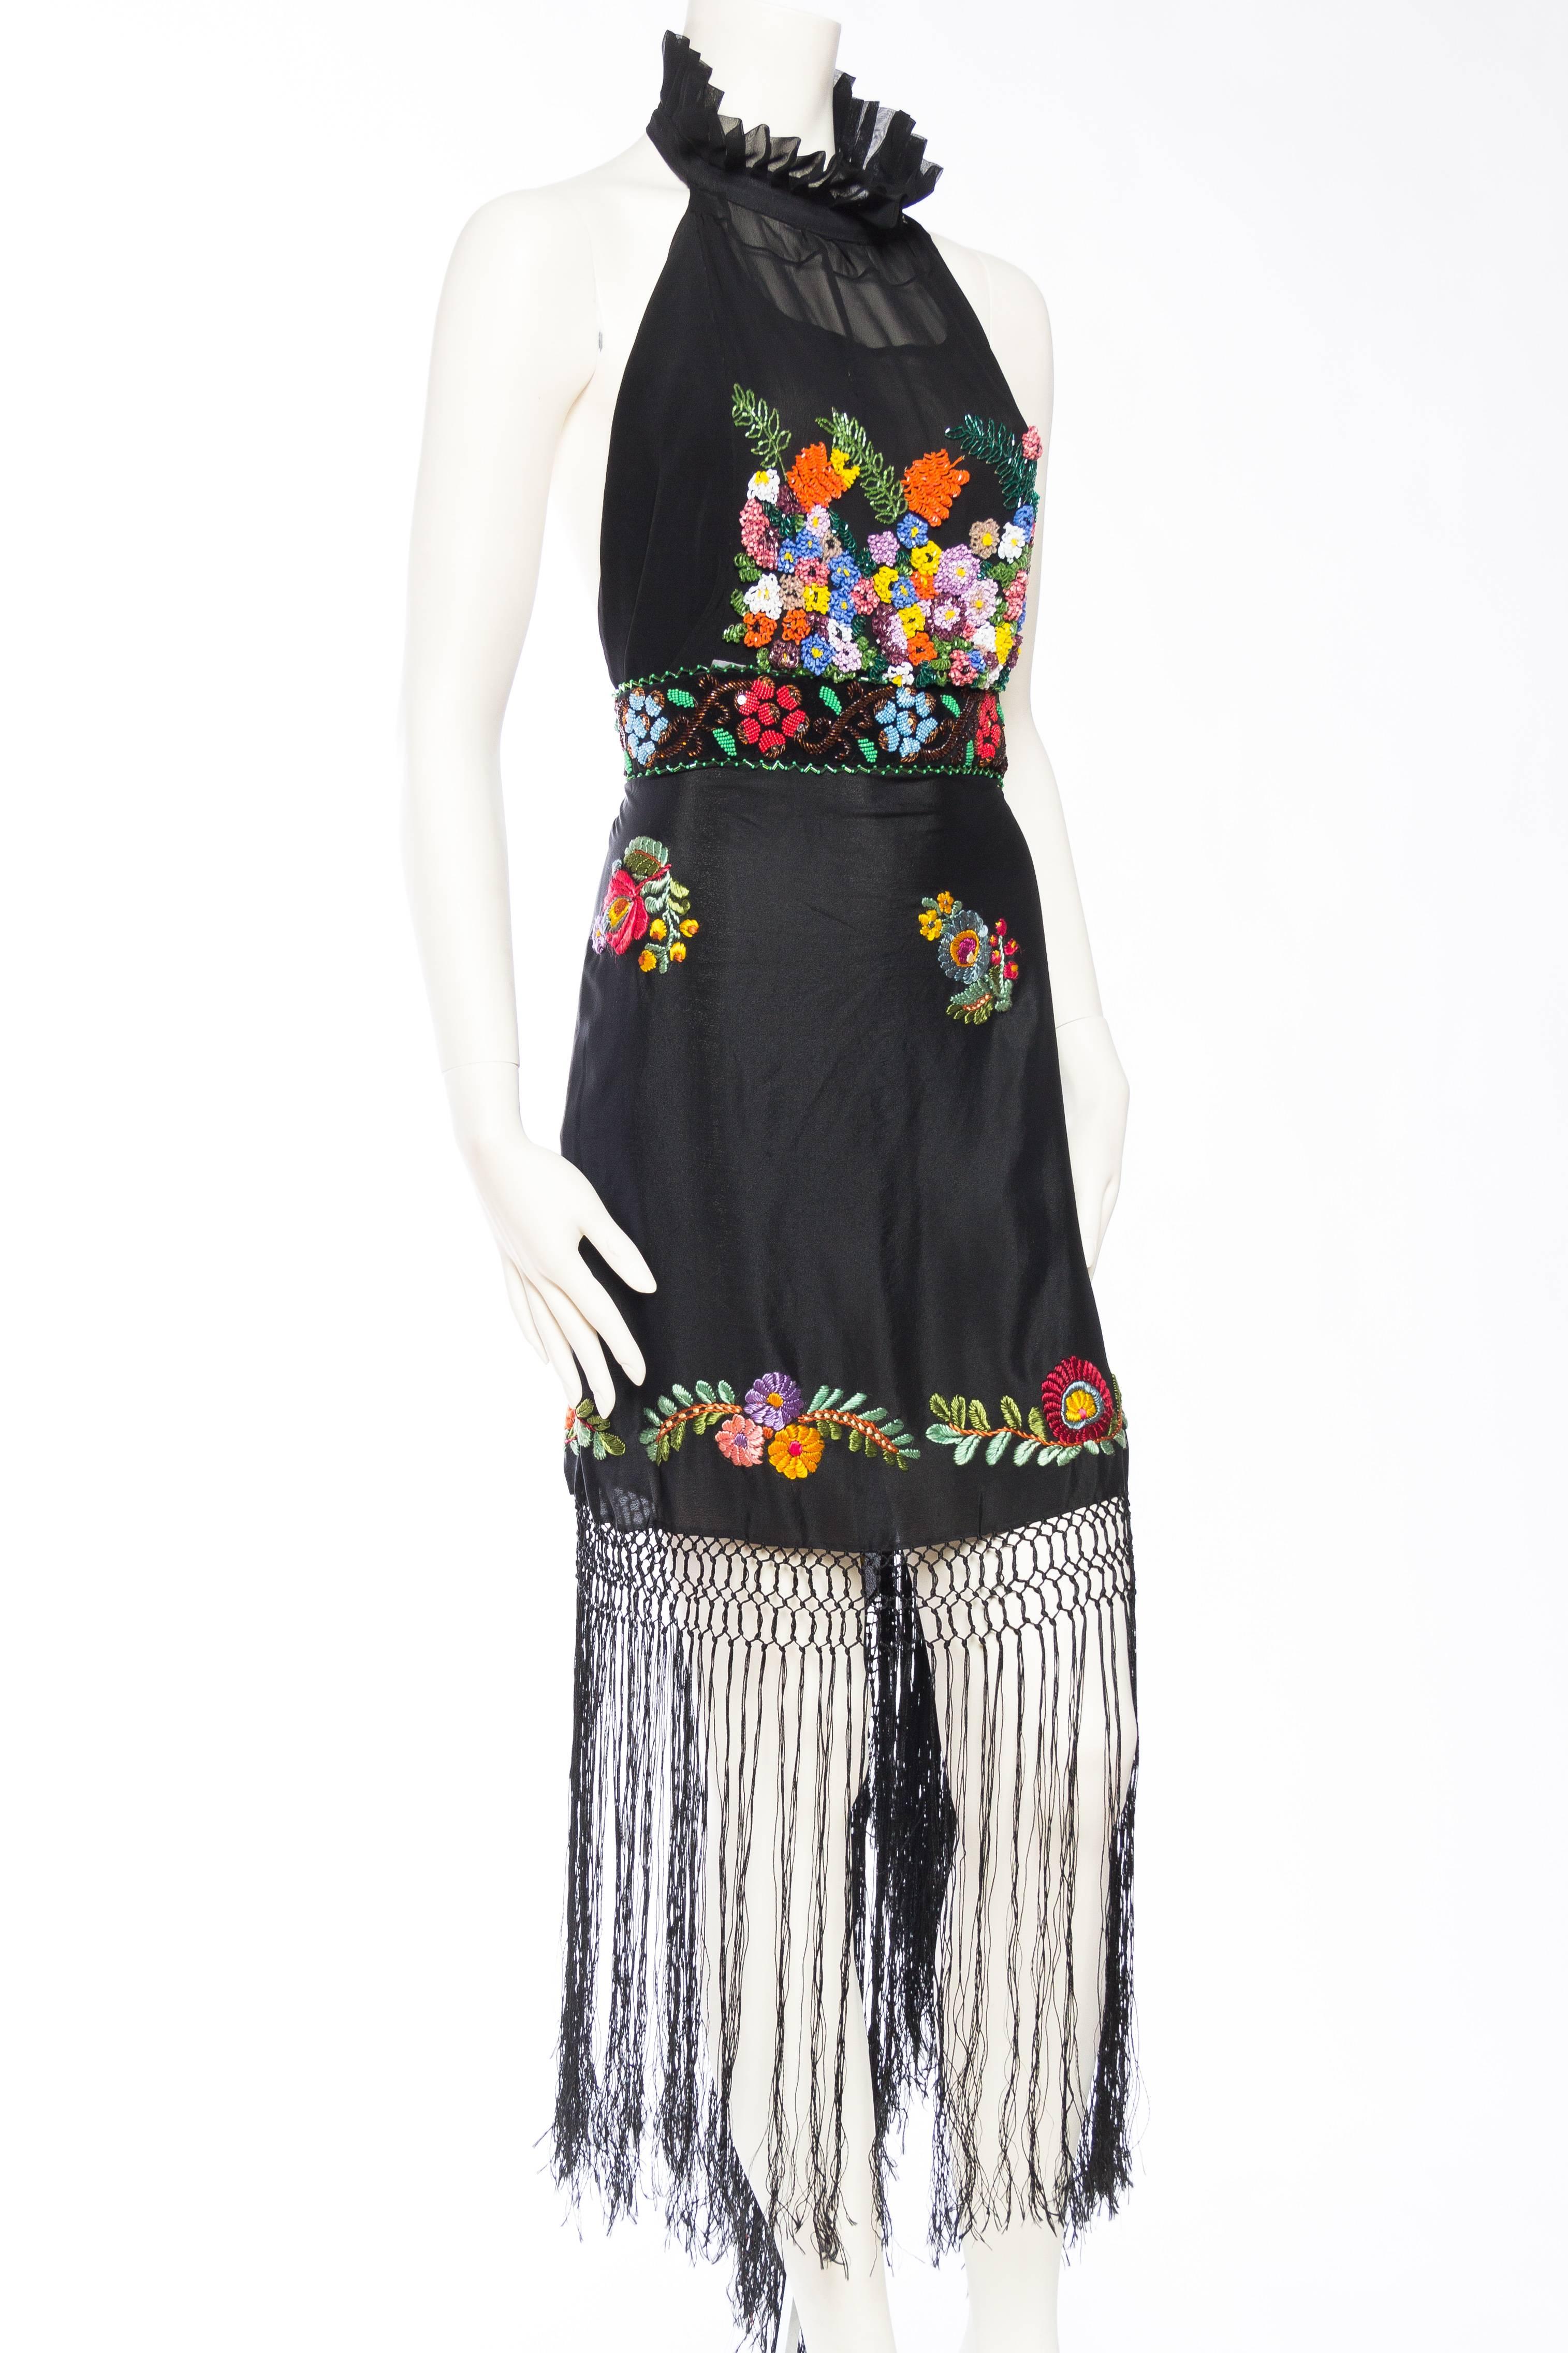 Black Beaded and Embroidered Bohemian Halter Dress With Fringe